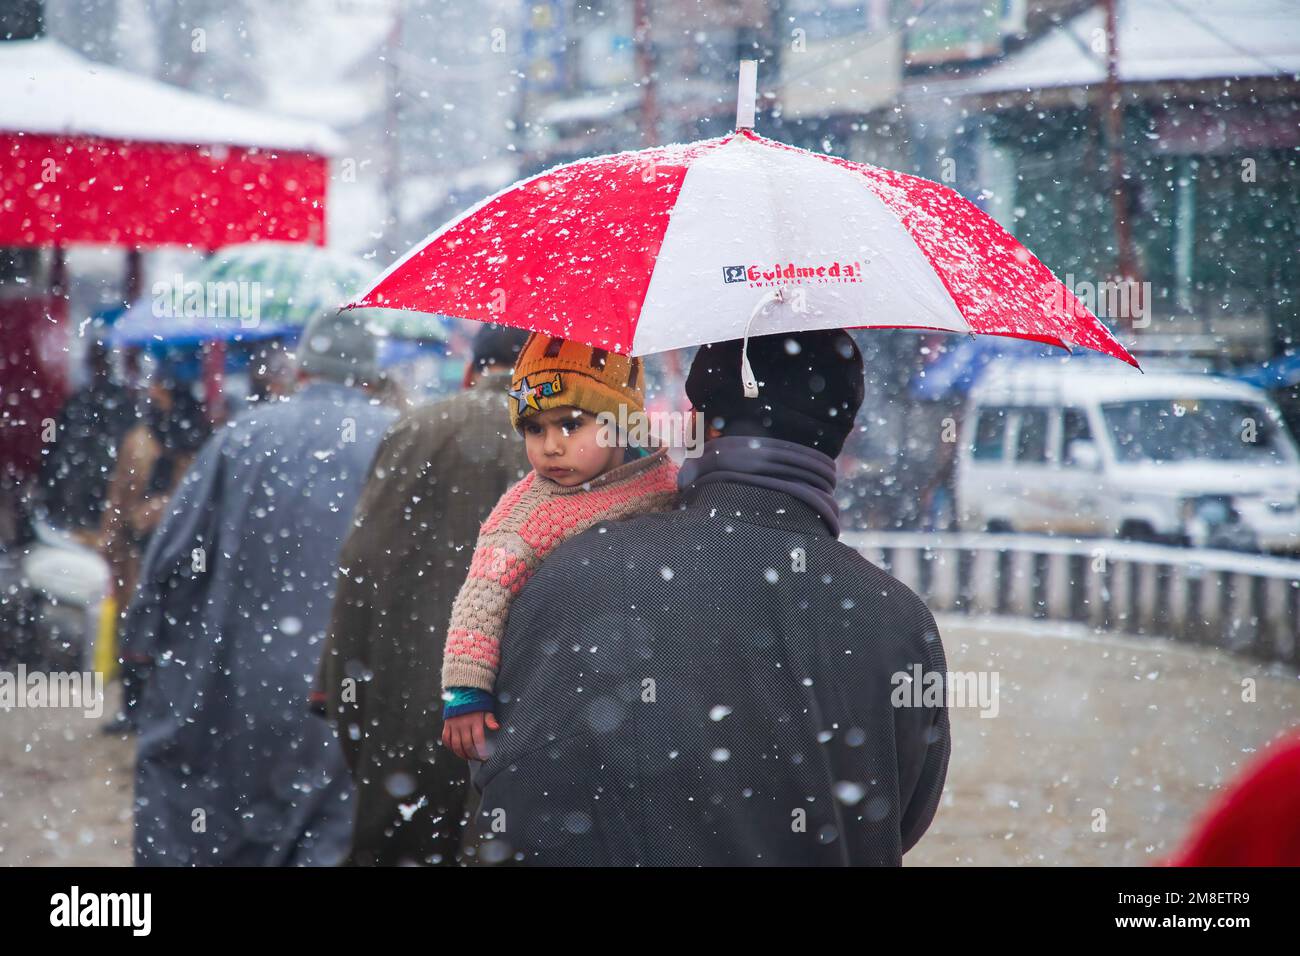 A Kashmiri man carries his child as he walks through a street amid ongoing heavy snowfall on the outskirts of Srinagar. At least two labourers killed on Thursday after an avalanche hits high-altitude area in central Kashmir's Sonamarg. Most parts of Kashmir received fresh snowfall that leading to the closure of Kashmir capital's main highway that connects disputed region with the rest of India. Meanwhile airport authorities suspended all flight operations till further notice due to continuous snowfall and low visibility. Stock Photo